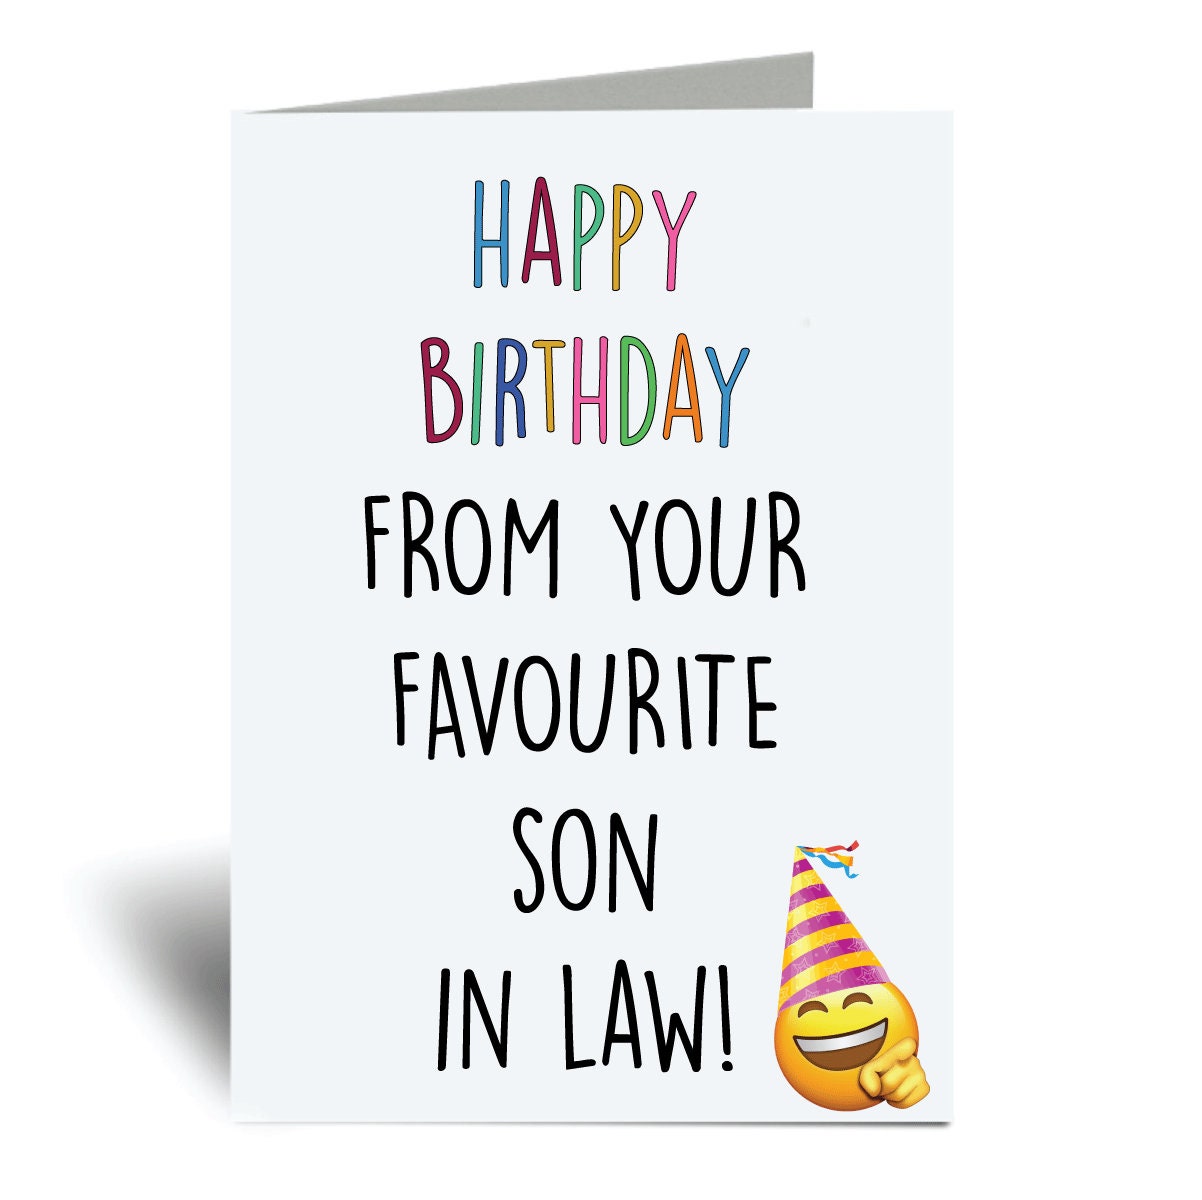 Buy Happy Birthday From Your Favourite Son in Law Card Greeting ...